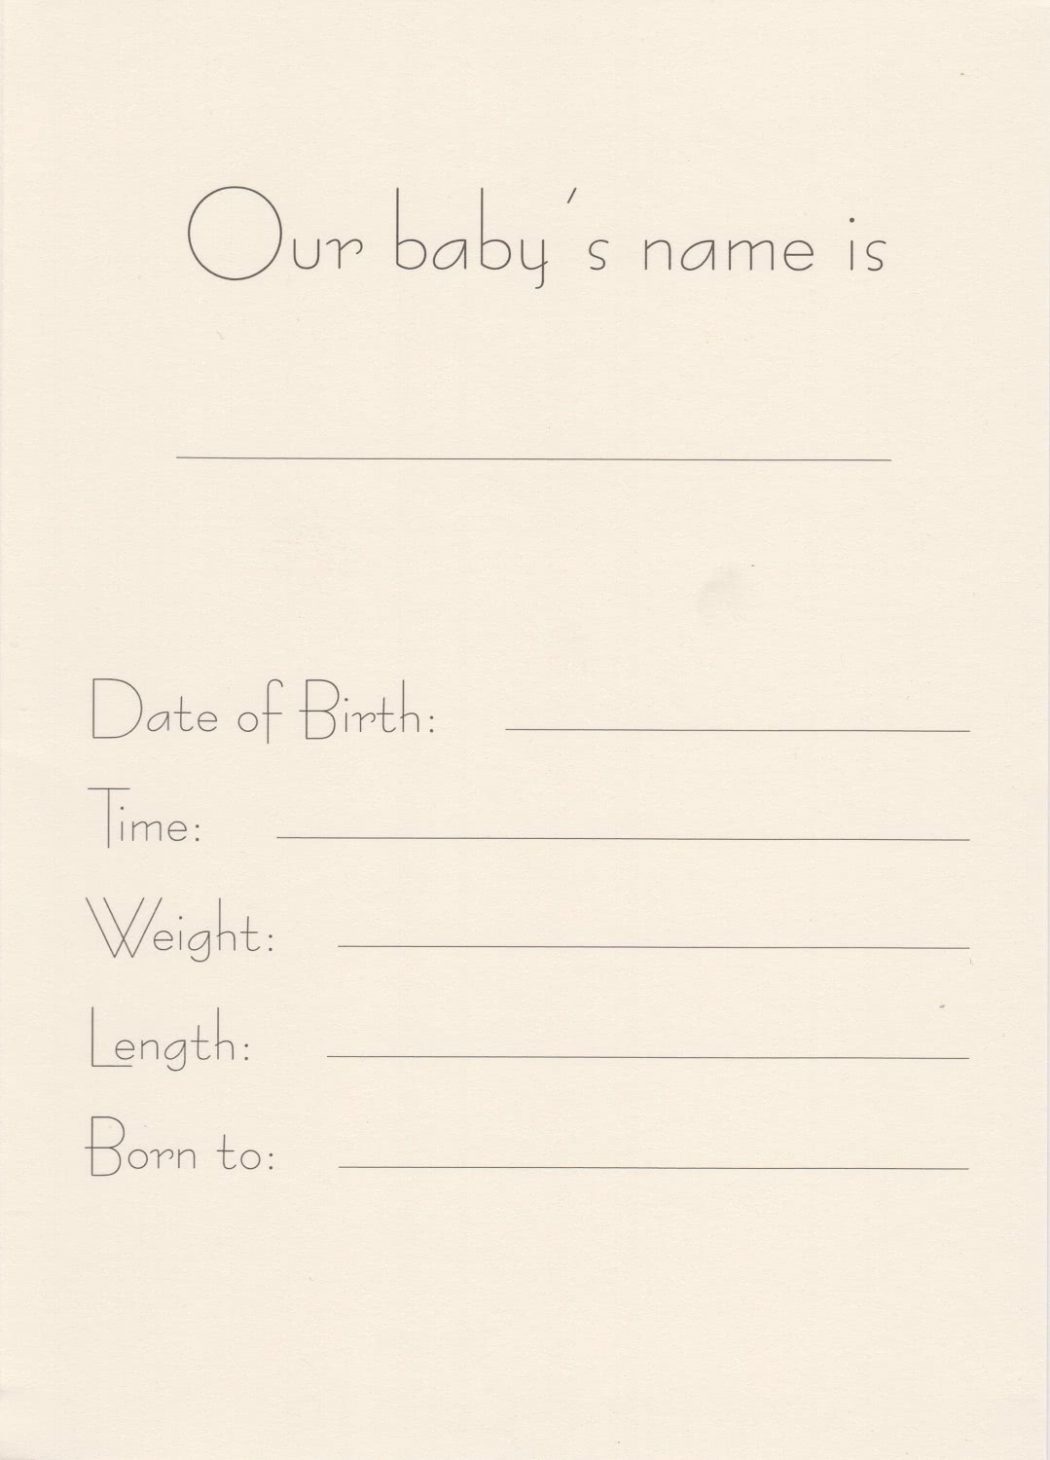 Inside of Imp Prints Co keepsakes for parents Angel Birth Announcement Card, has lines for nome, date of birth, time, weight, length, born to